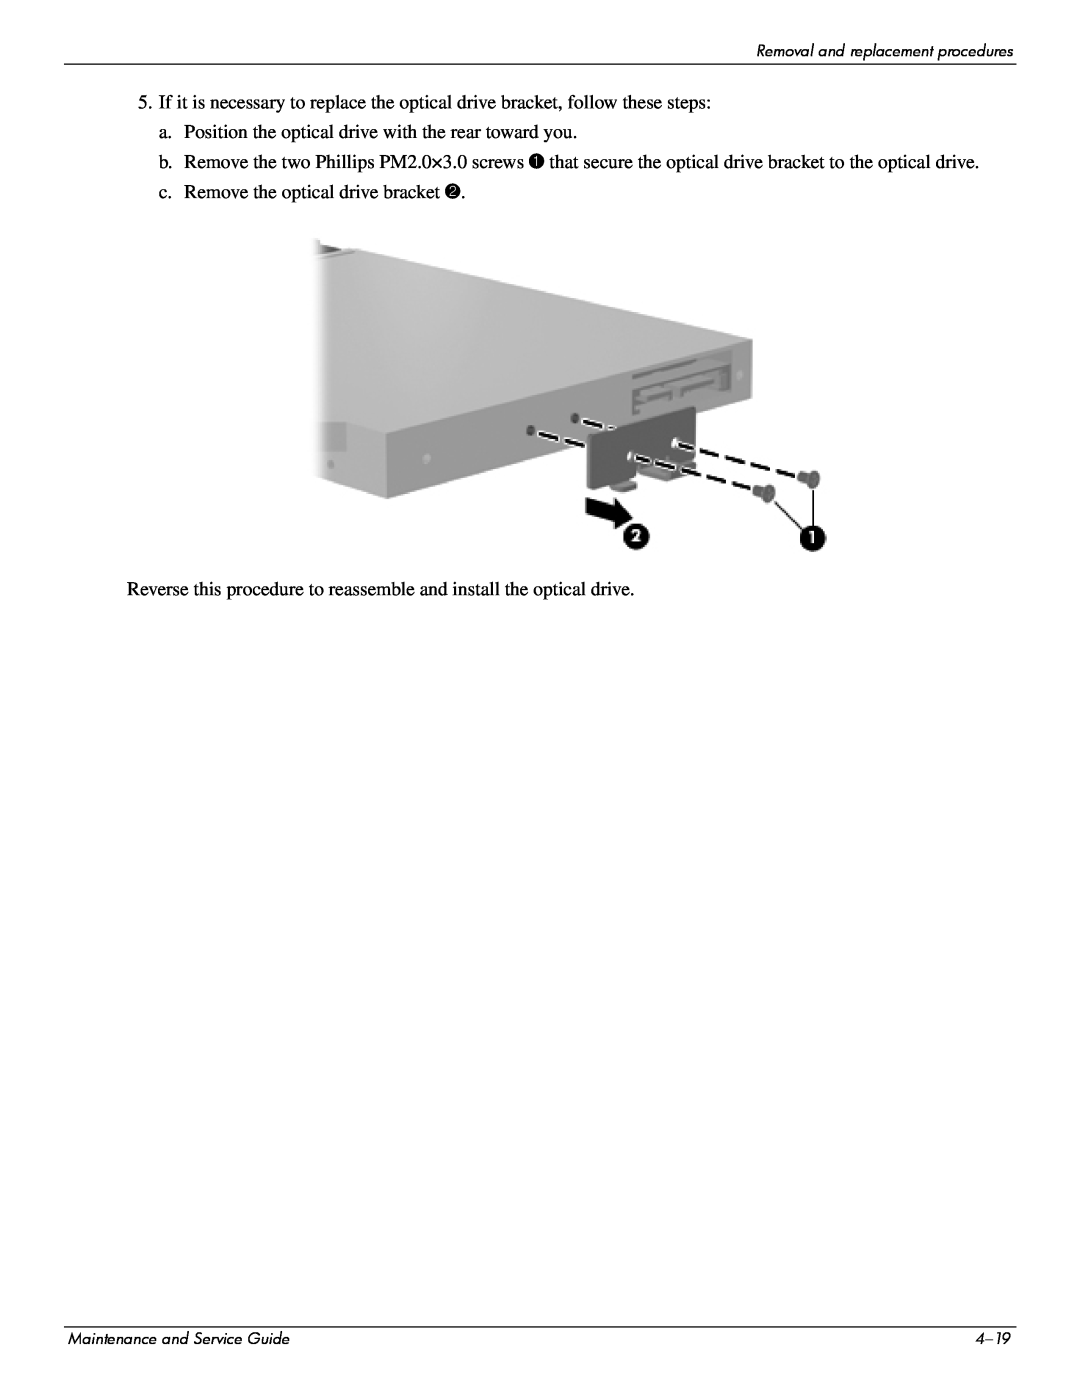 Compaq 515, 511, 510 manual a. Position the optical drive with the rear toward you 